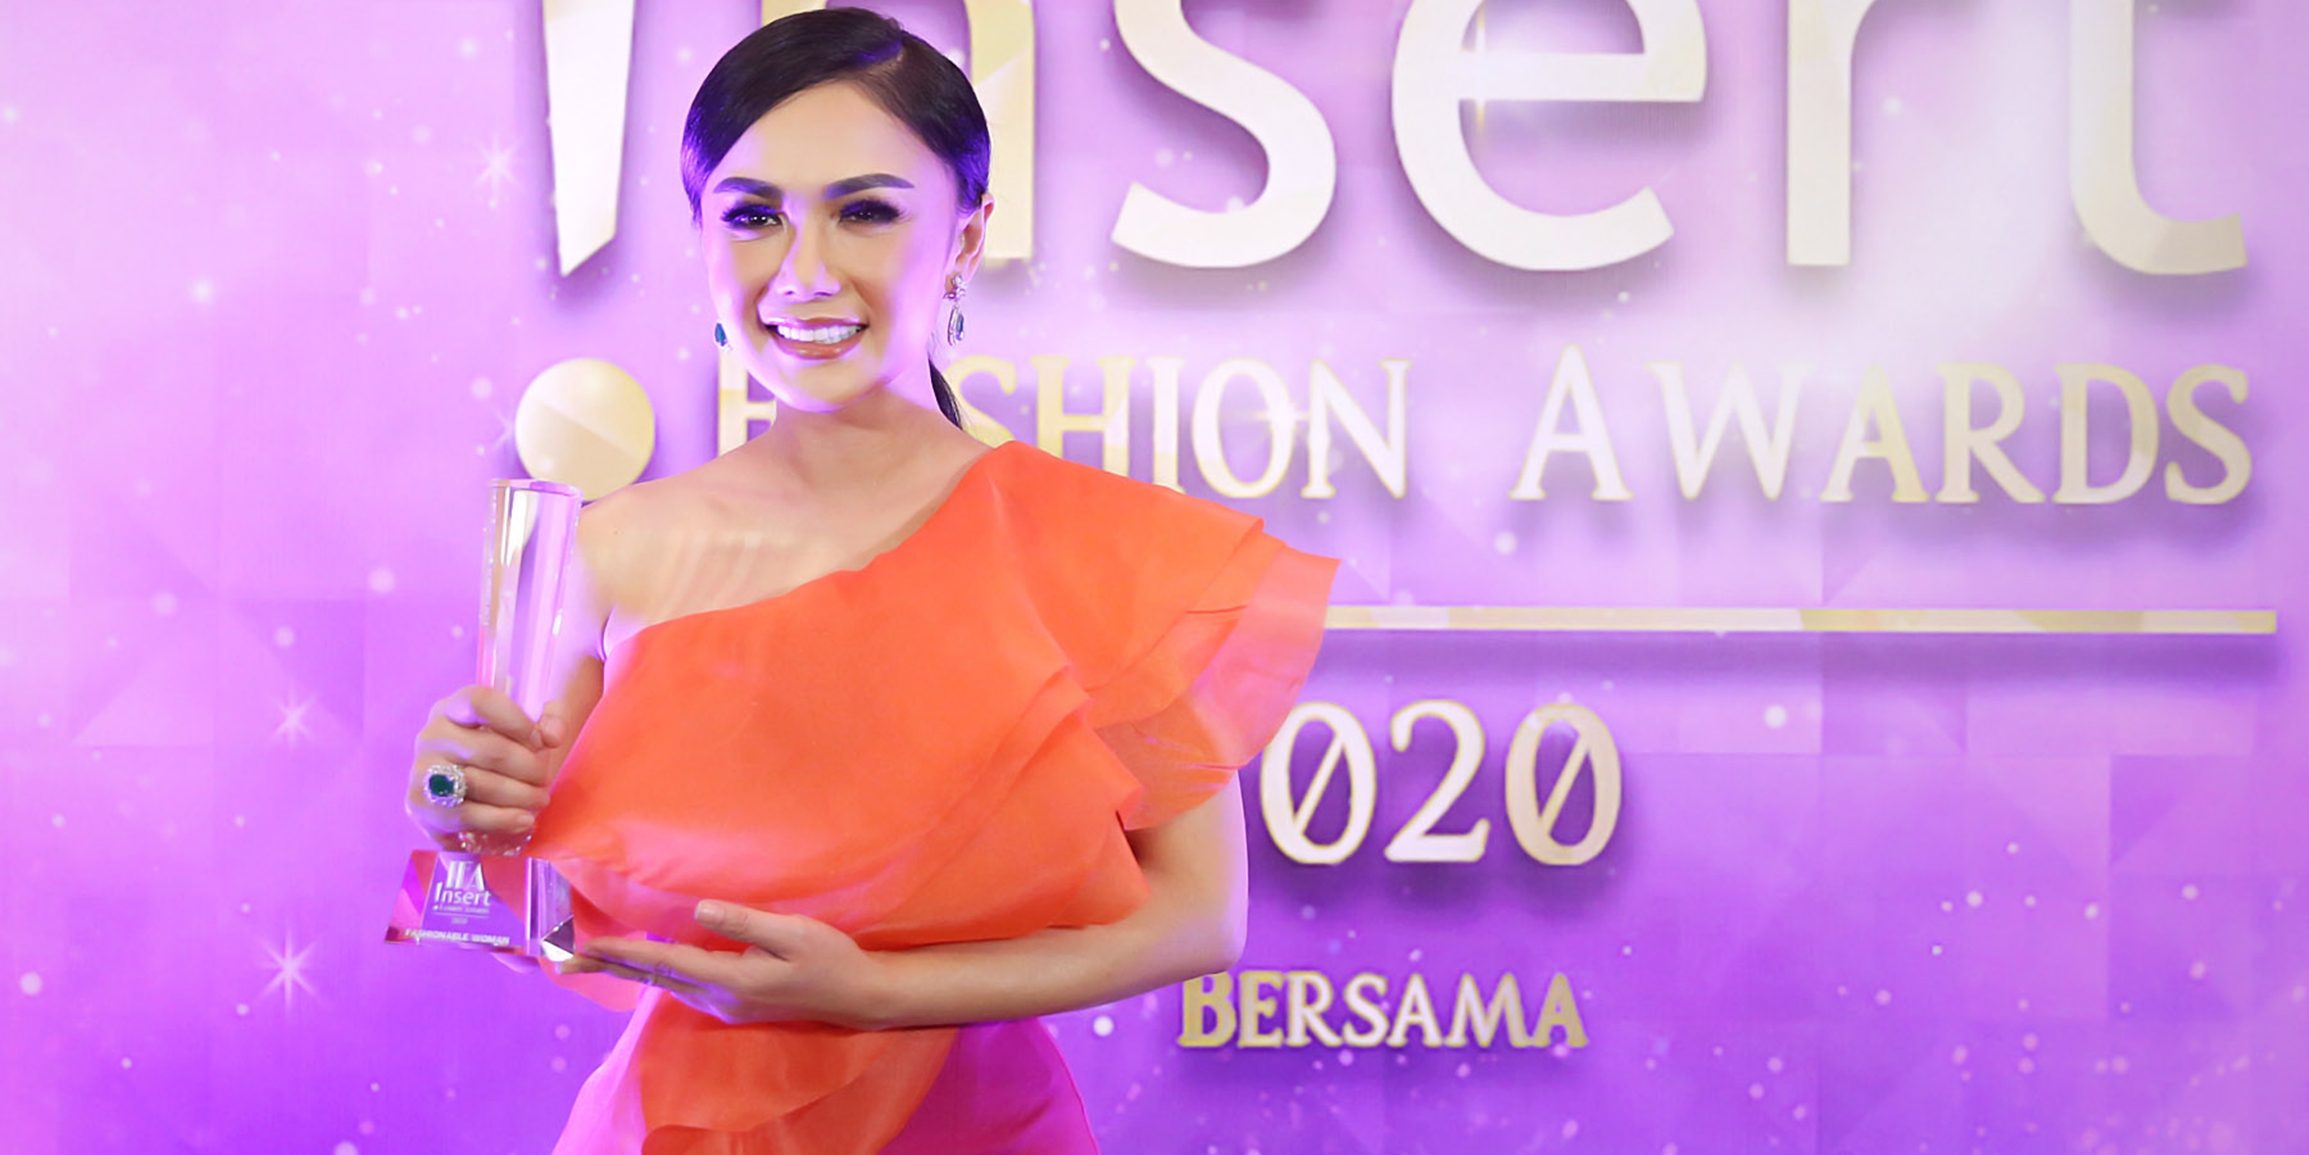 Themed Color Me Glam, Several Celebrities Look Stunning at the Insert Fashion Awards 2020